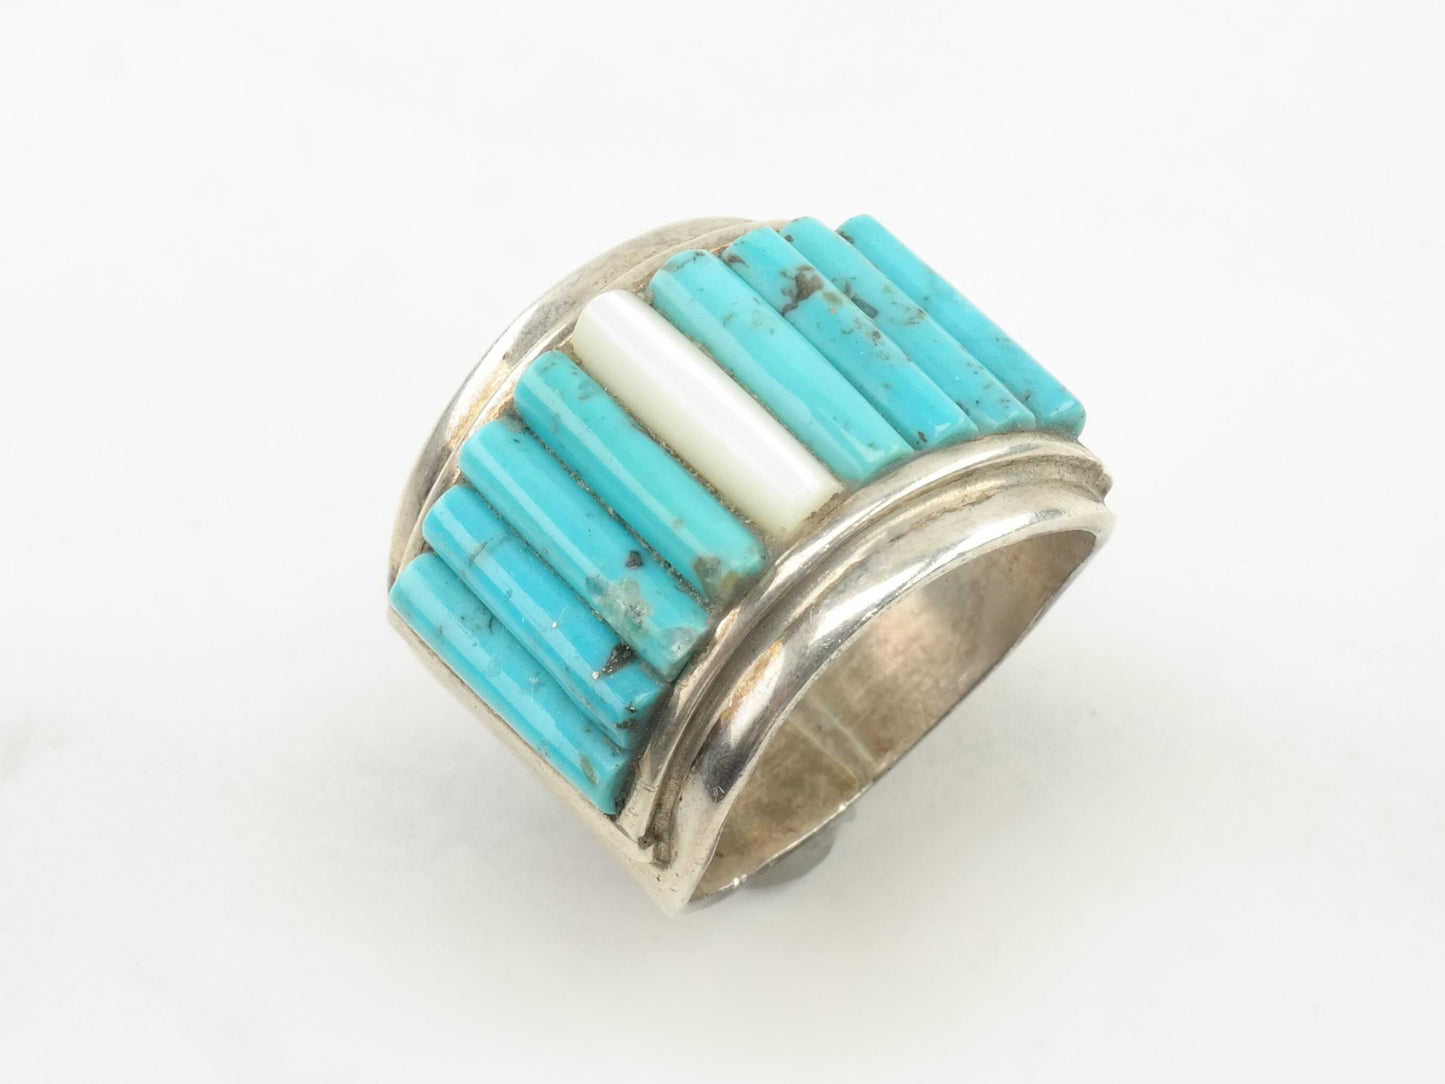 Vintage Southwest Sterling Silver Ring Turquoise MOP Cobblestone inlay Blue Size 10 1/4